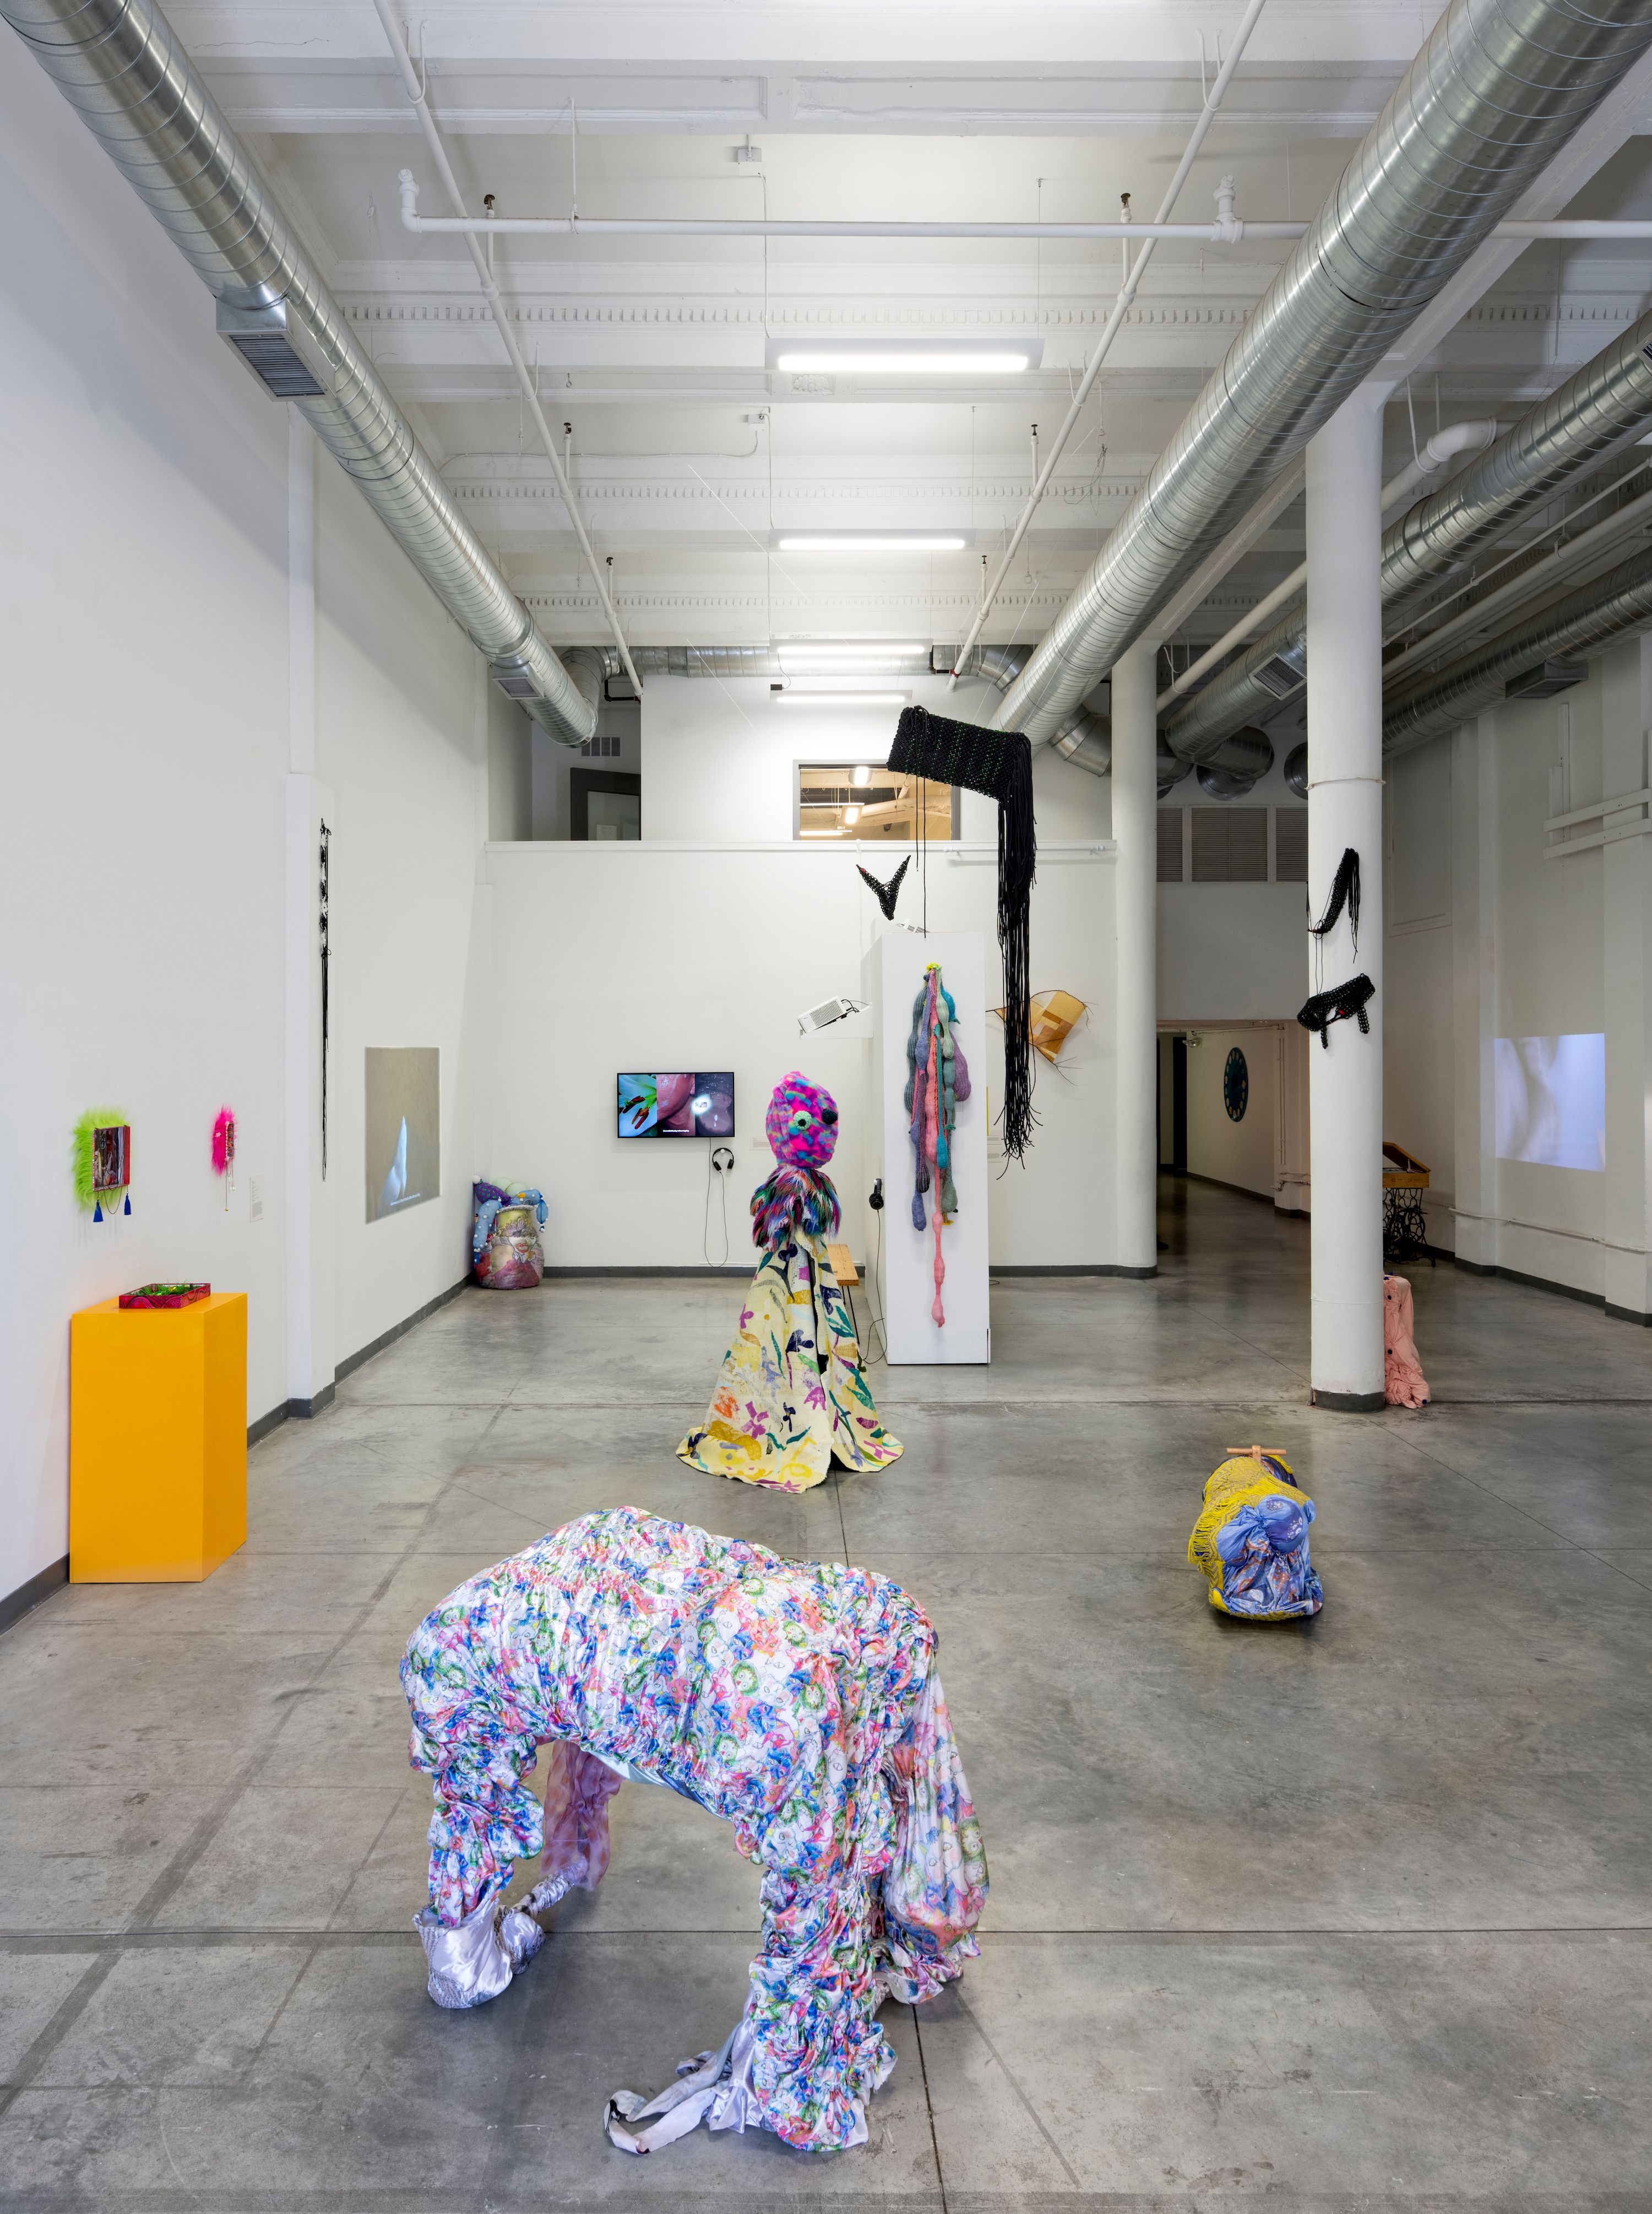 Installation of colorful fabric sculptures in a gallery space